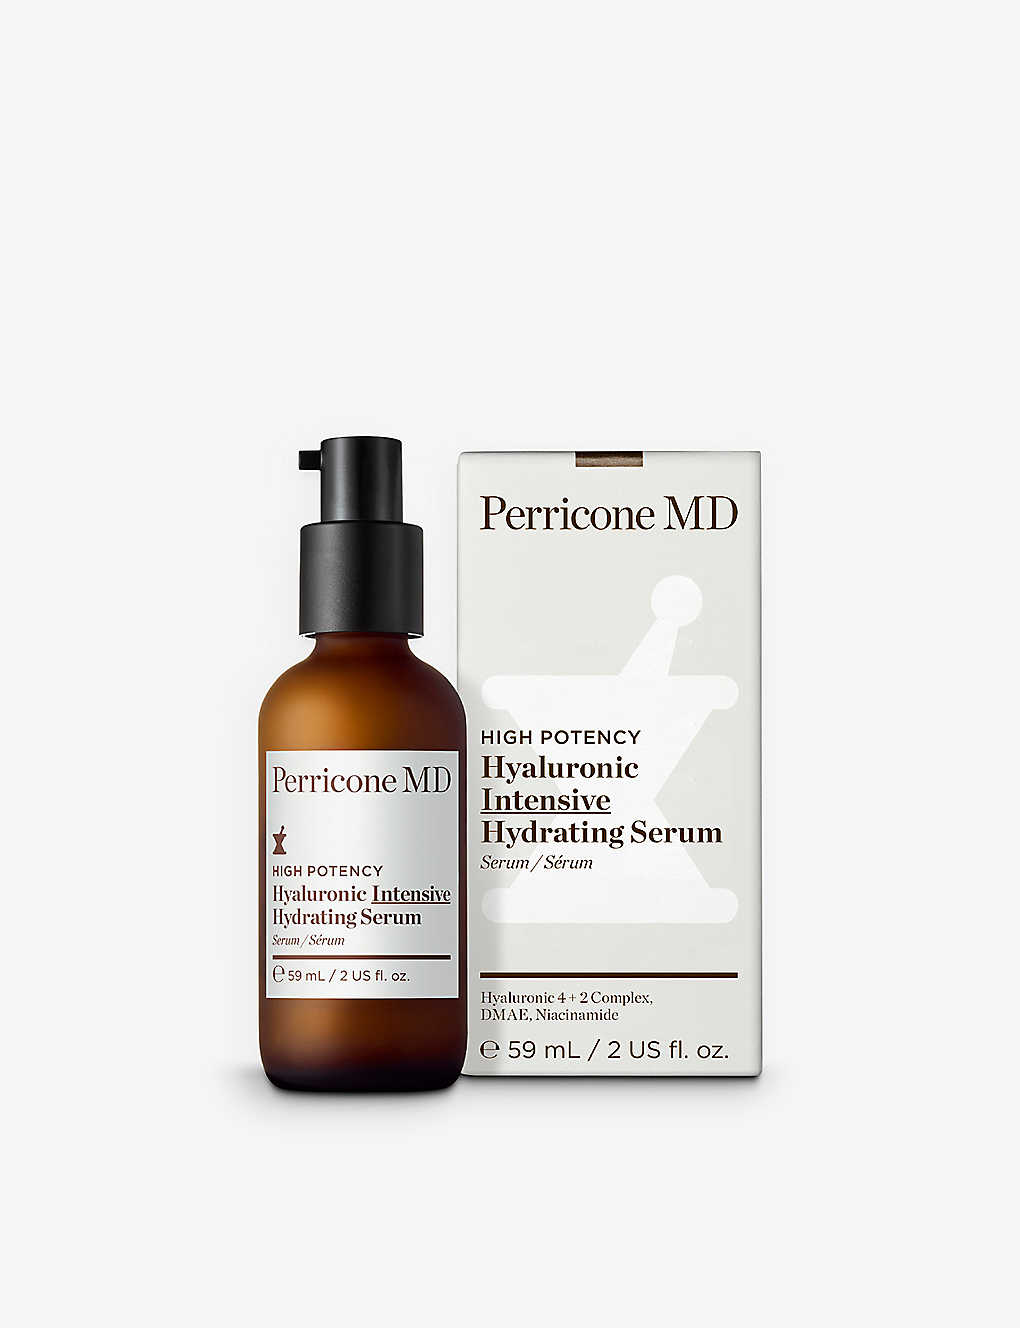 Perricone Md High Potency Hyaluronic Intensive Hydrating Serum In Brown